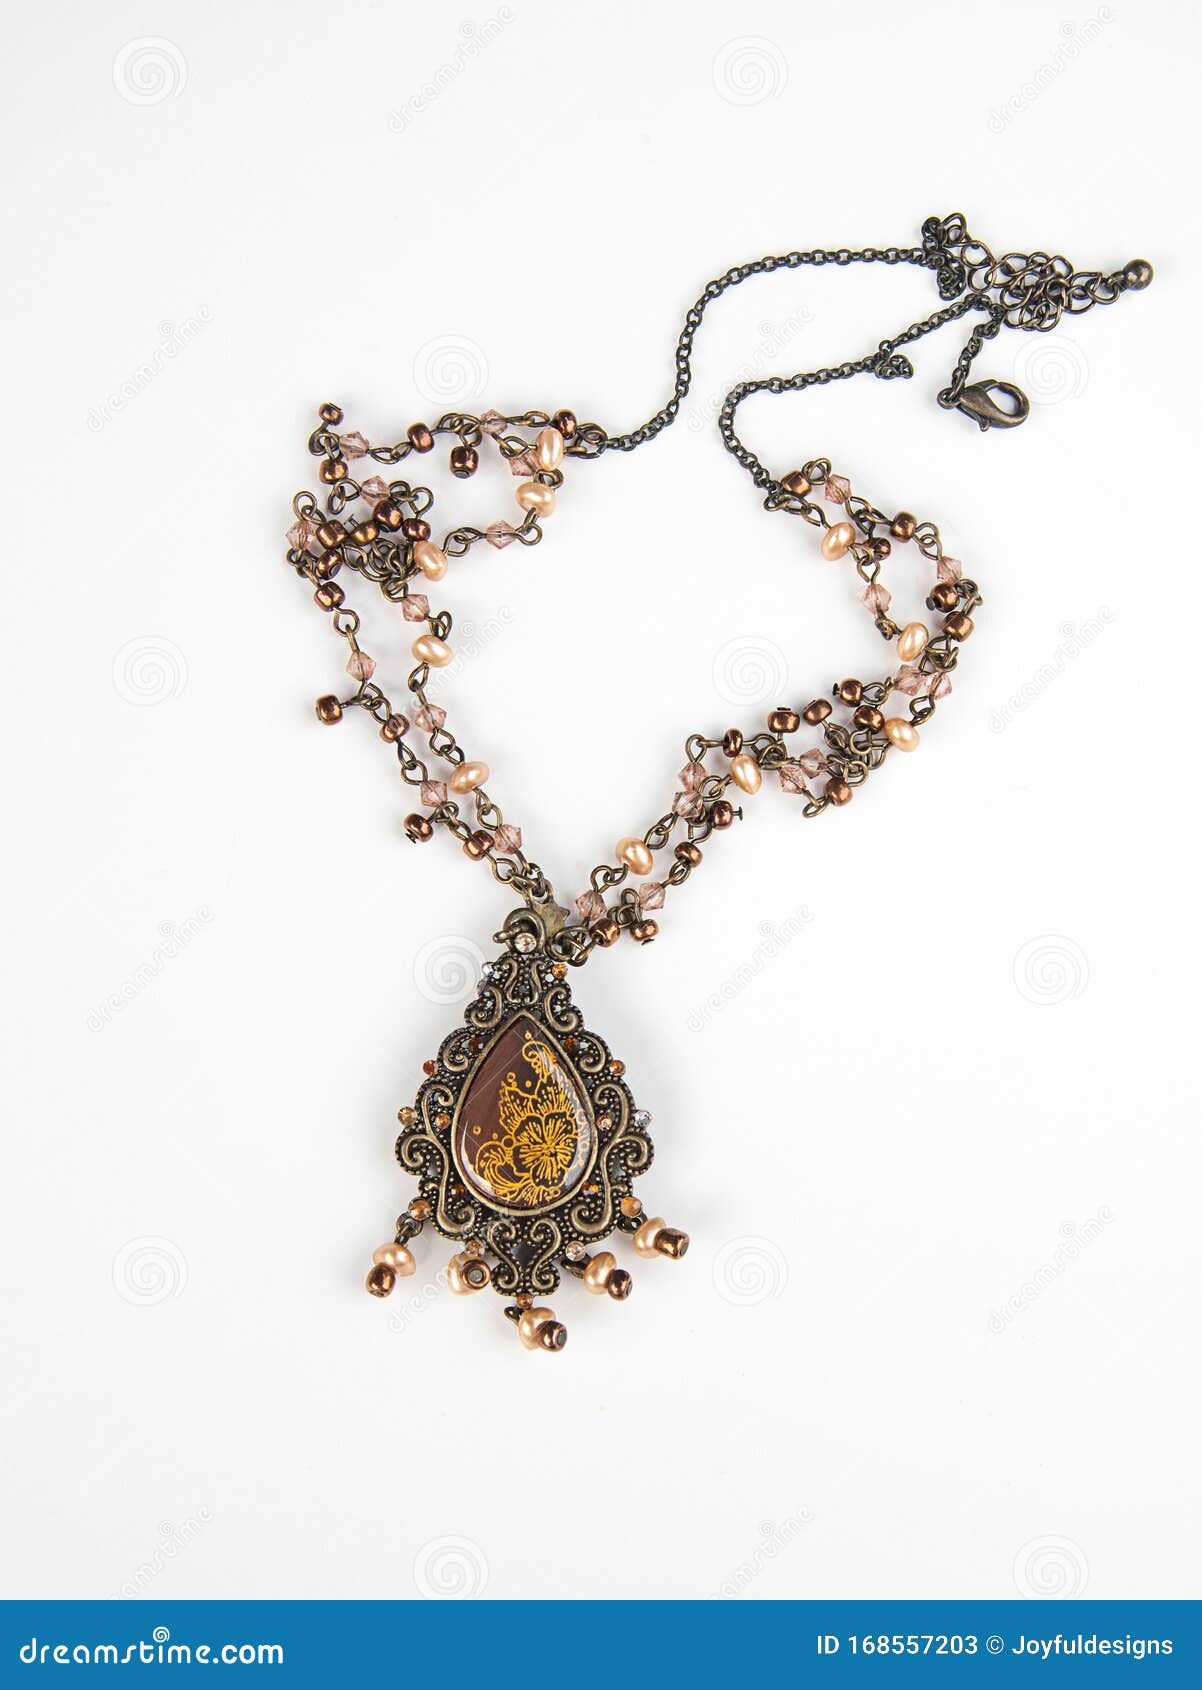 Vintage Pendant Necklace Jewelry with Beads Stock Image - Image of ...